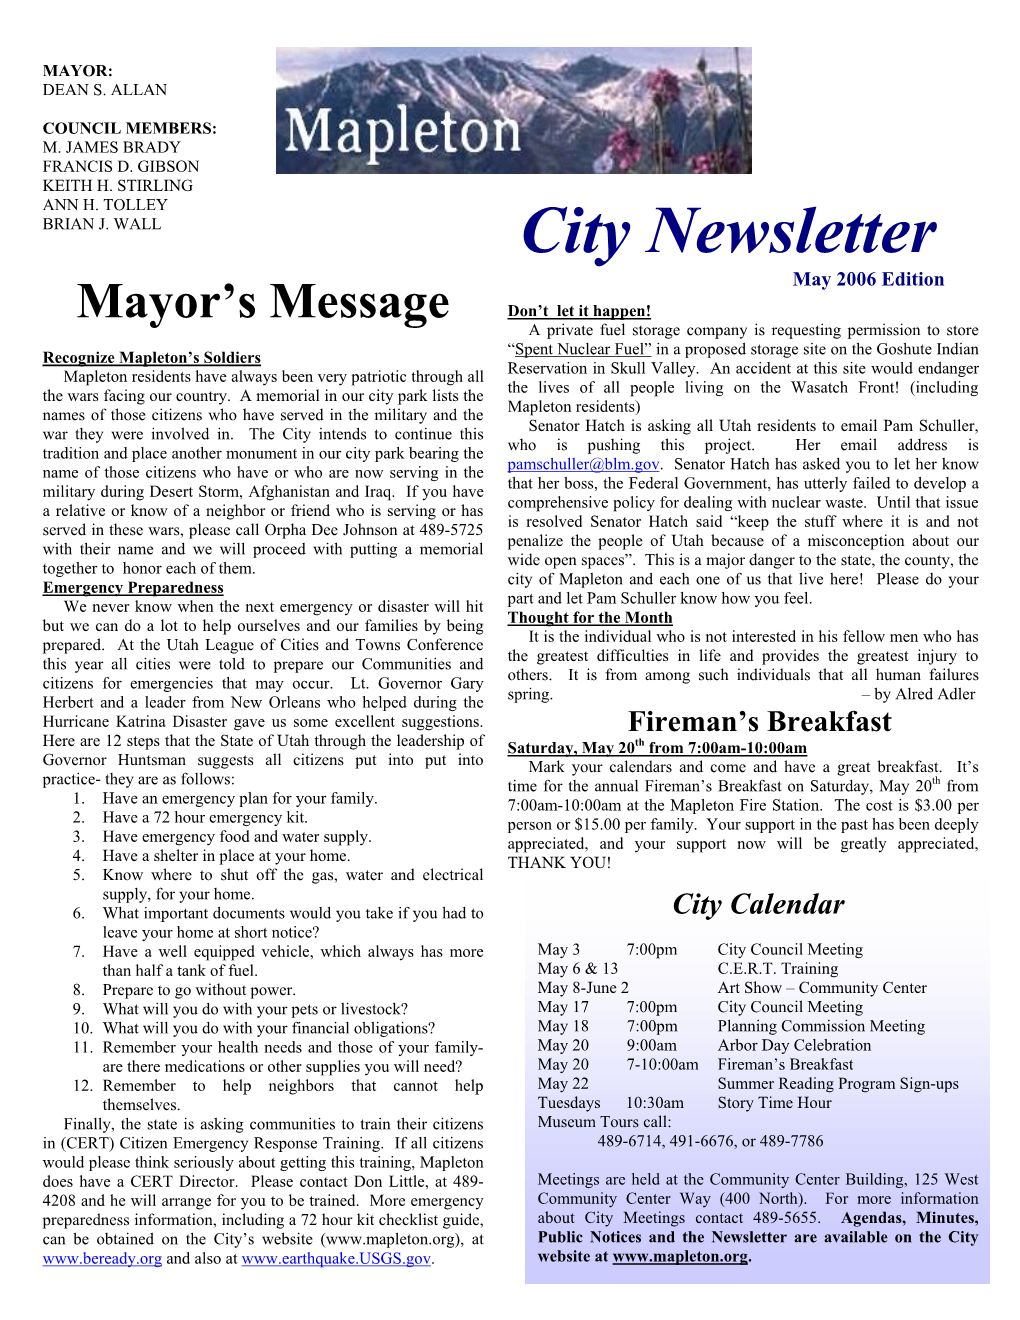 City Newsletter May 2006 Edition Mayor’S Message Don’T Let It Happen! a Private Fuel Storage Company Is Requesting Permission to Store